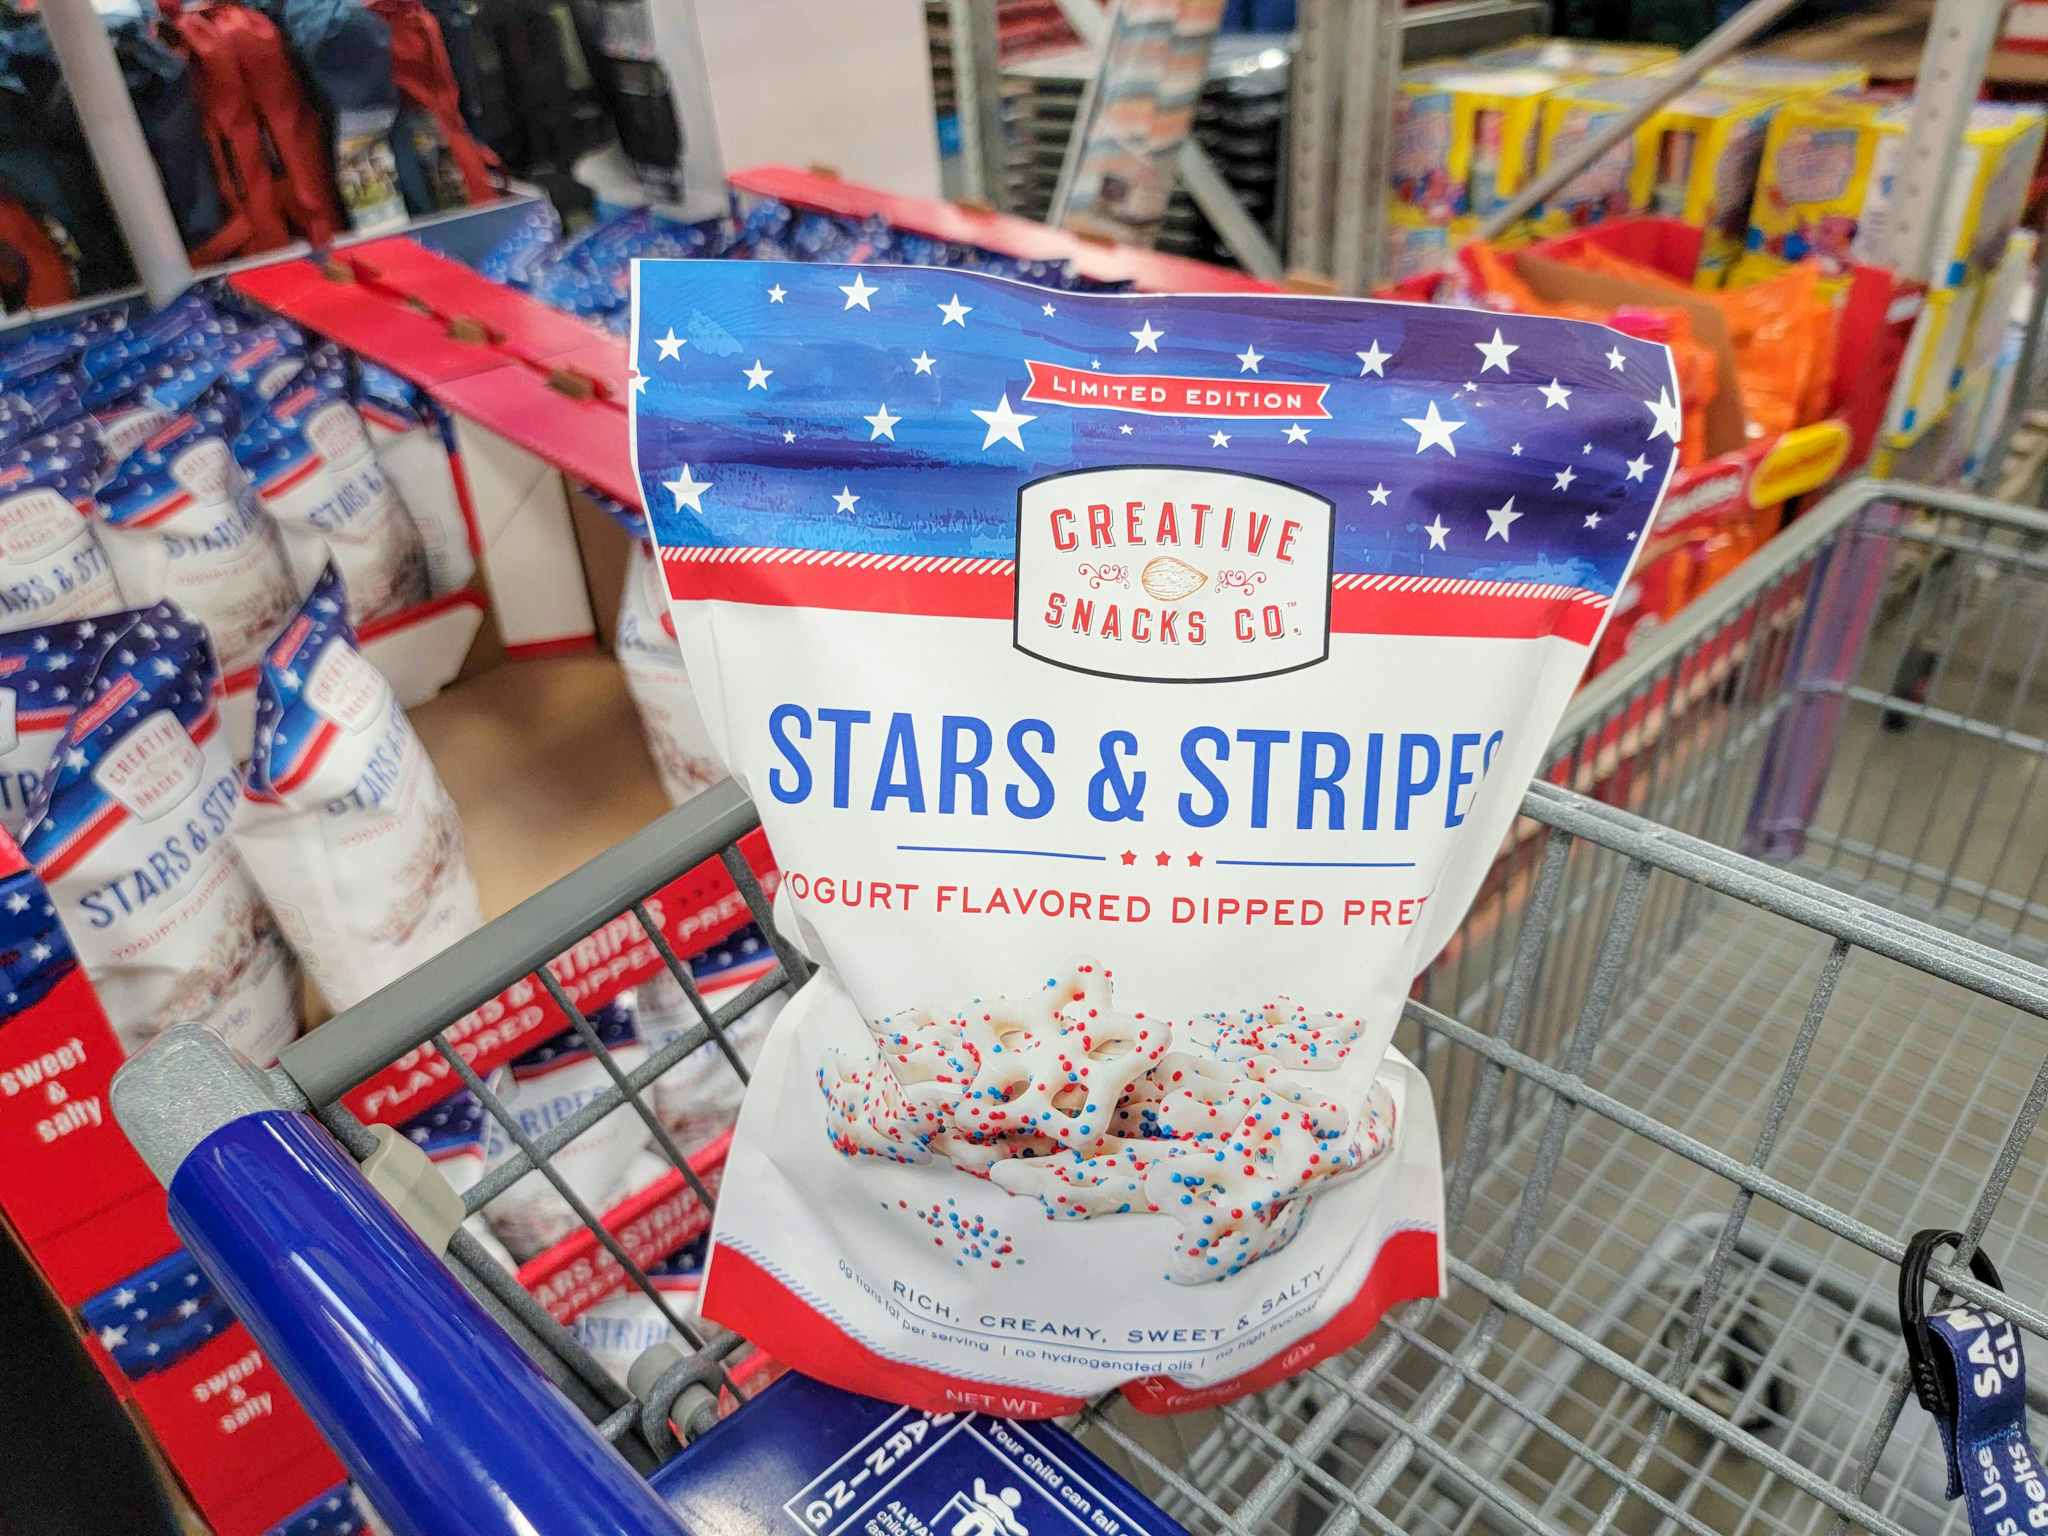 a bag of stars and stripes pretzels in a cart